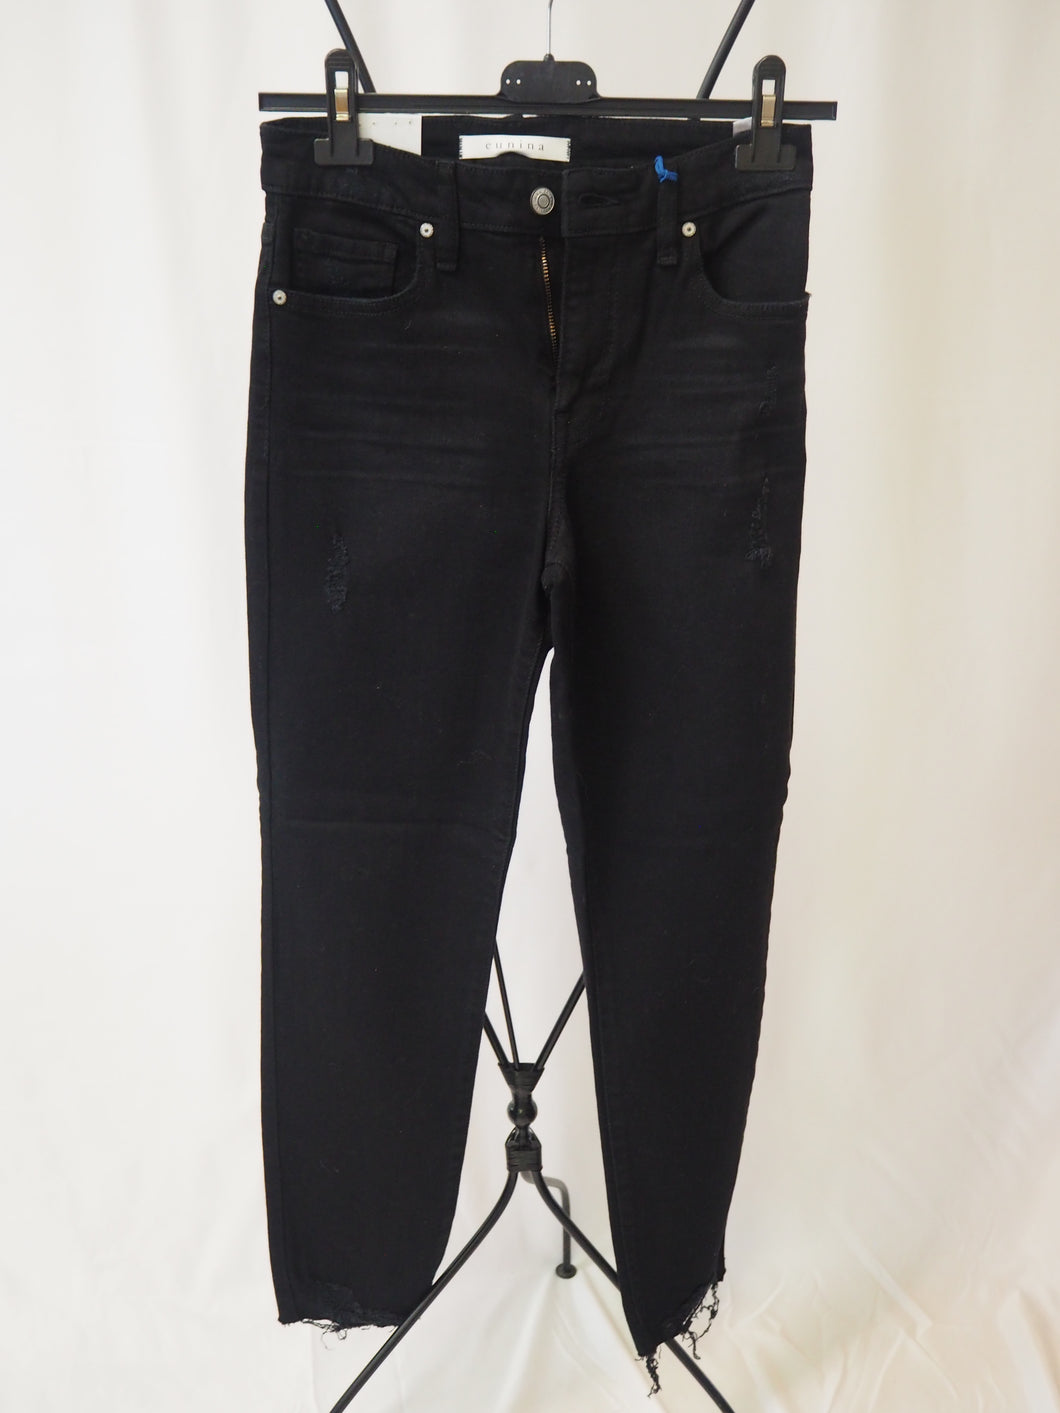 High-Waisted Distressed Black Jeans